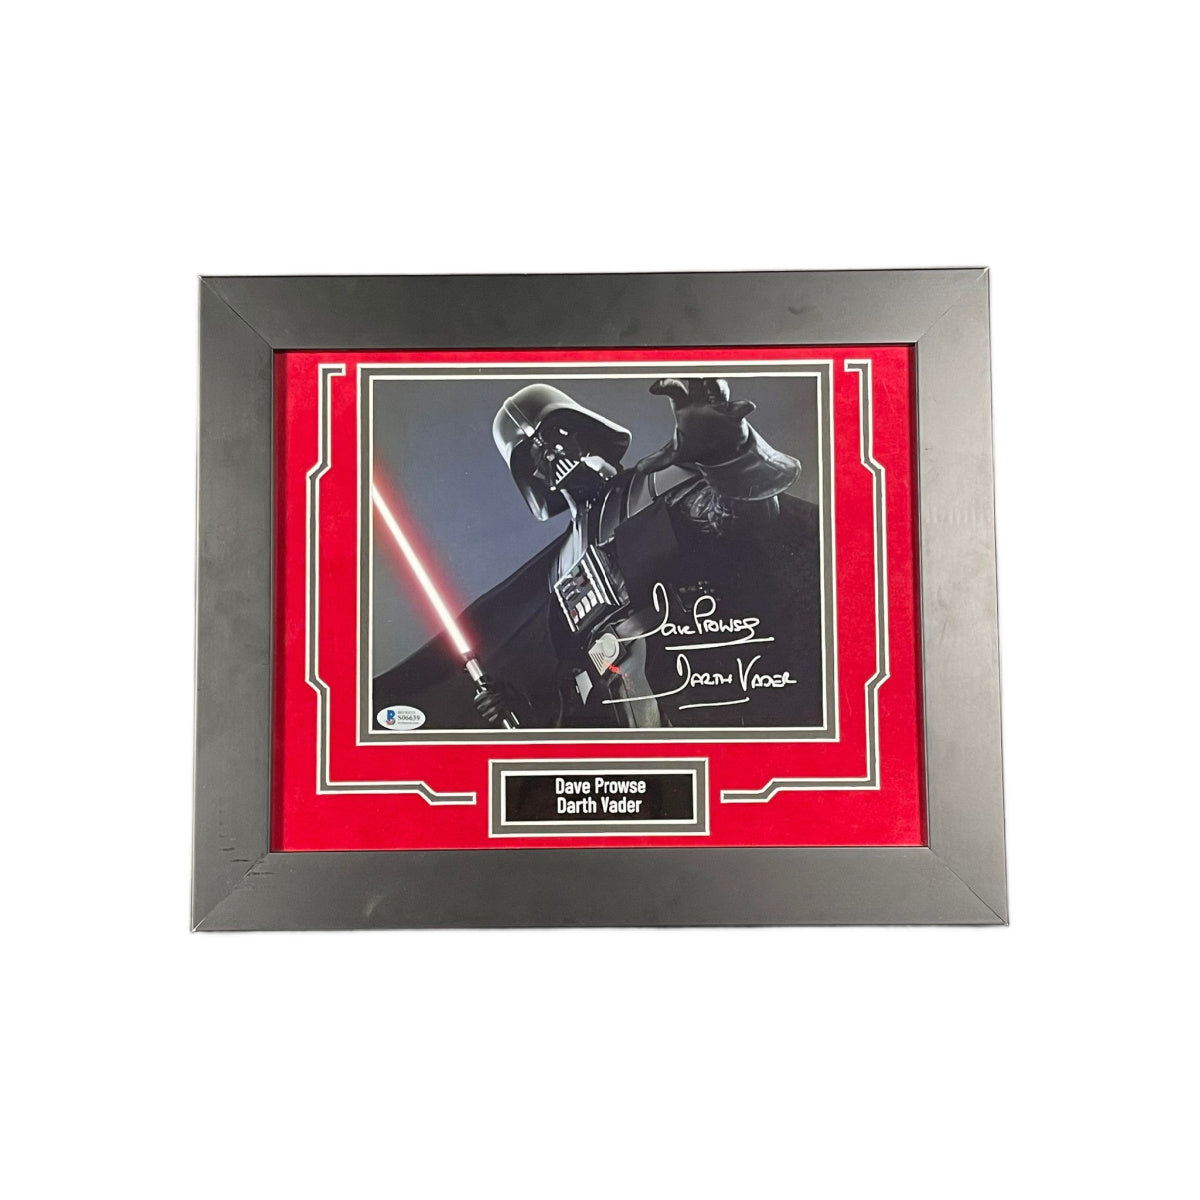 Dave Prowse Signed 8x10 Photo Framed Star Wars Darth Vader Autographed BAS COA